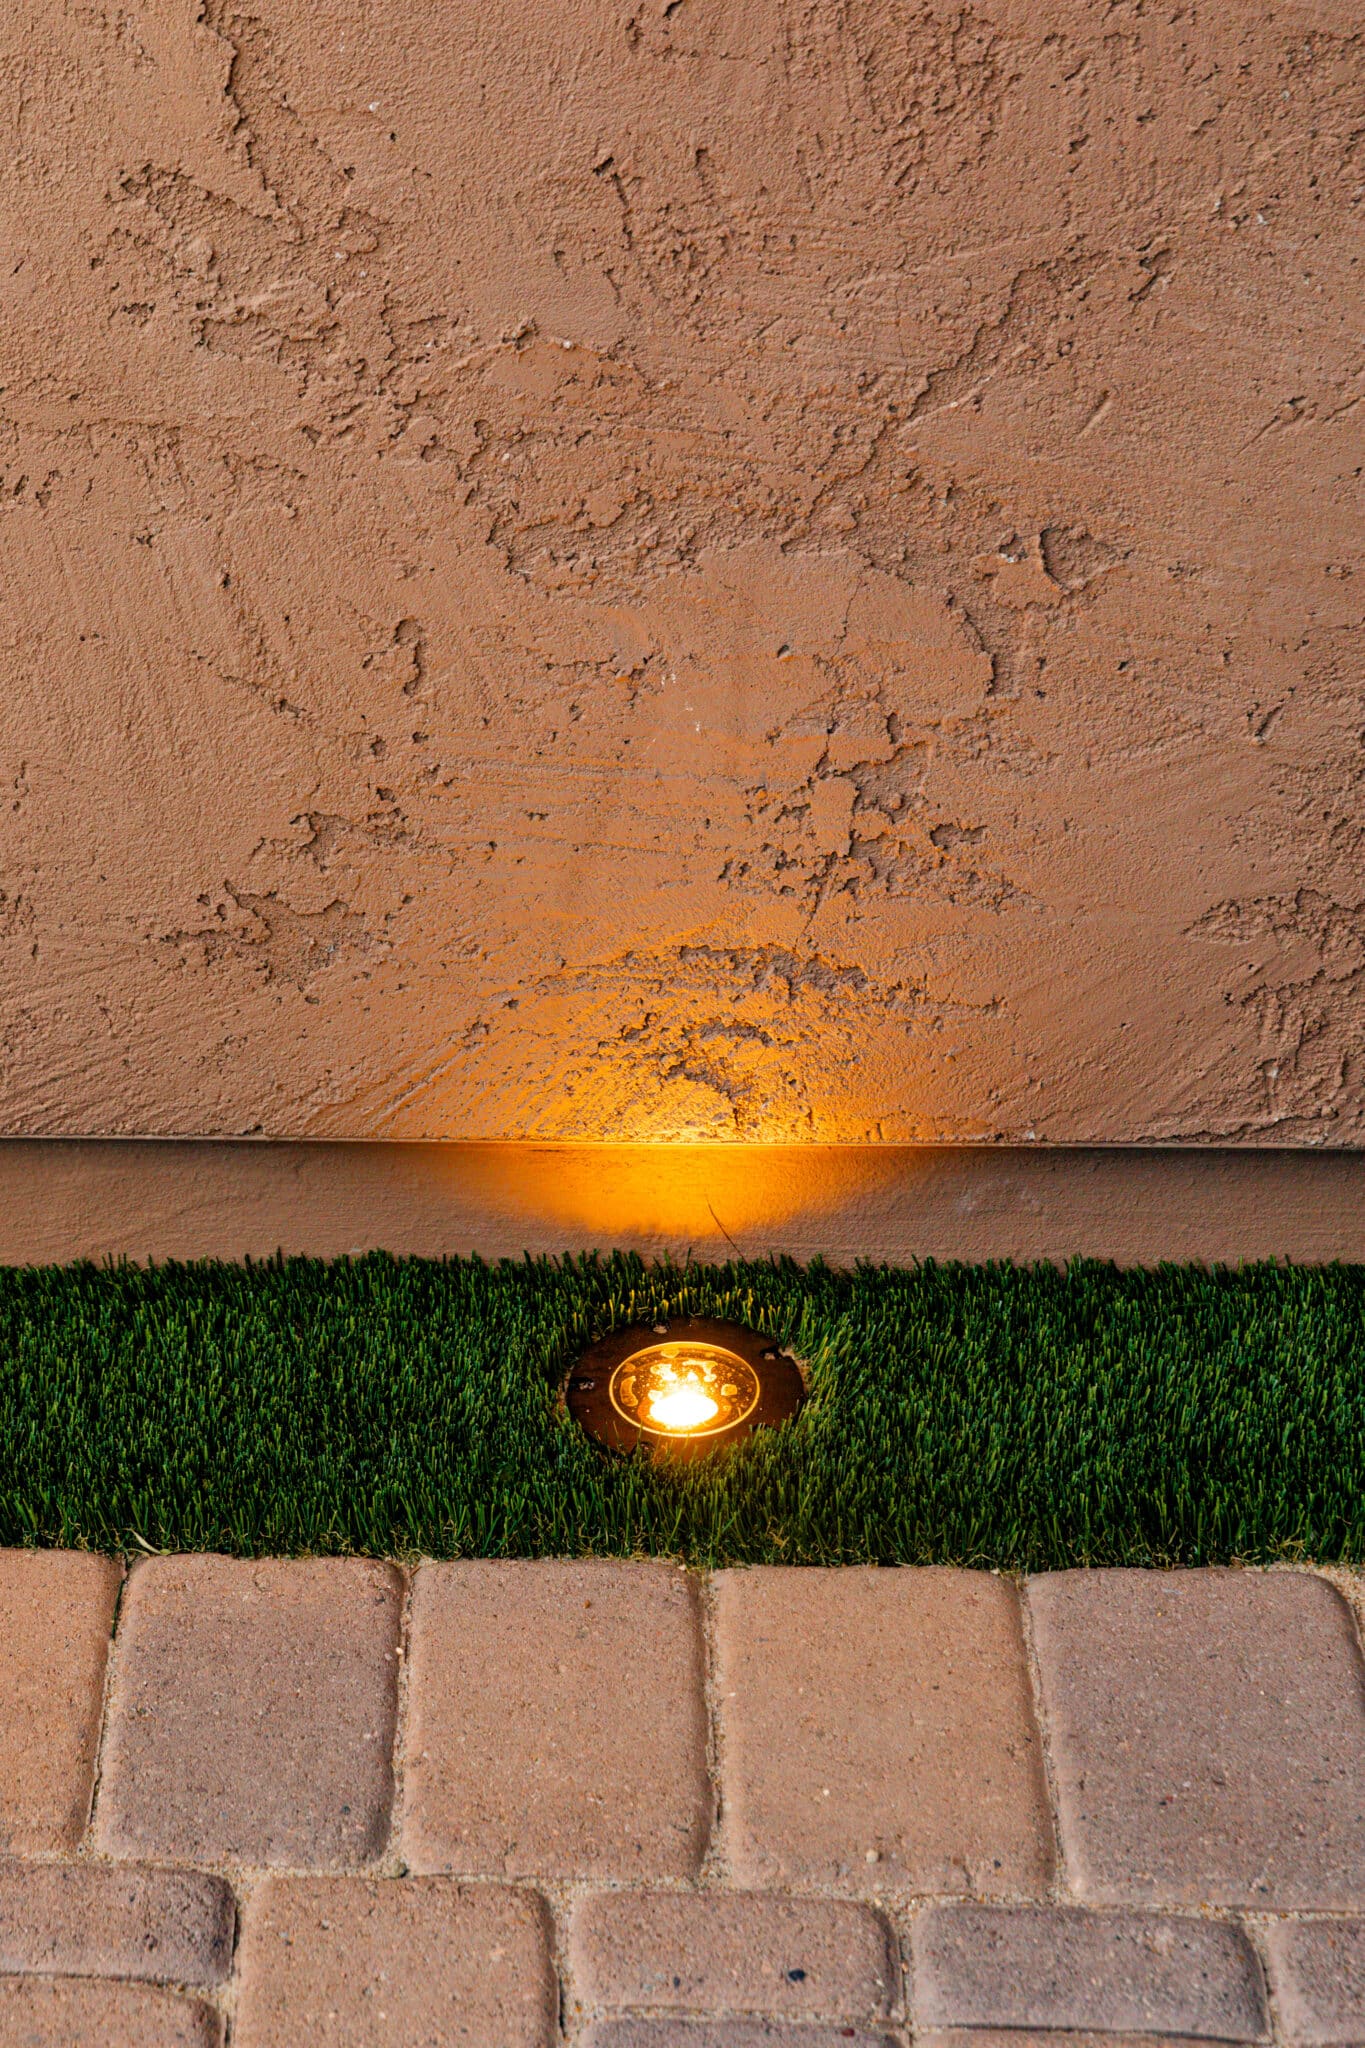 Lighting hidden in artificial turf with wall and pavement